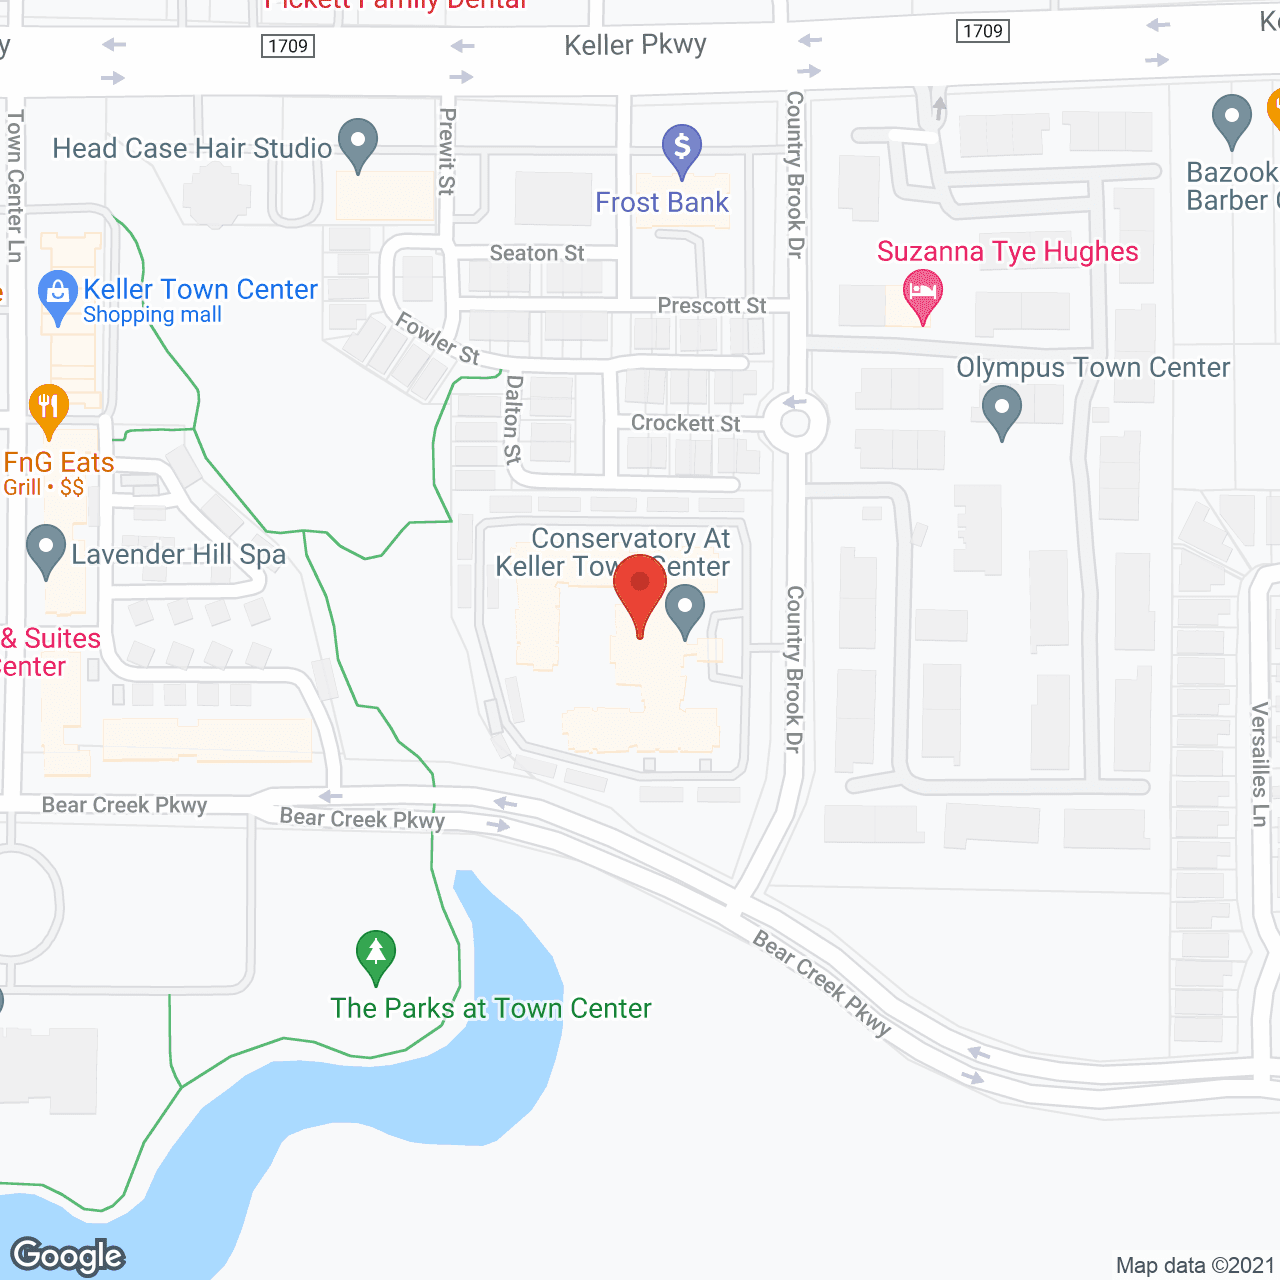 The Conservatory at Keller Town Center in google map